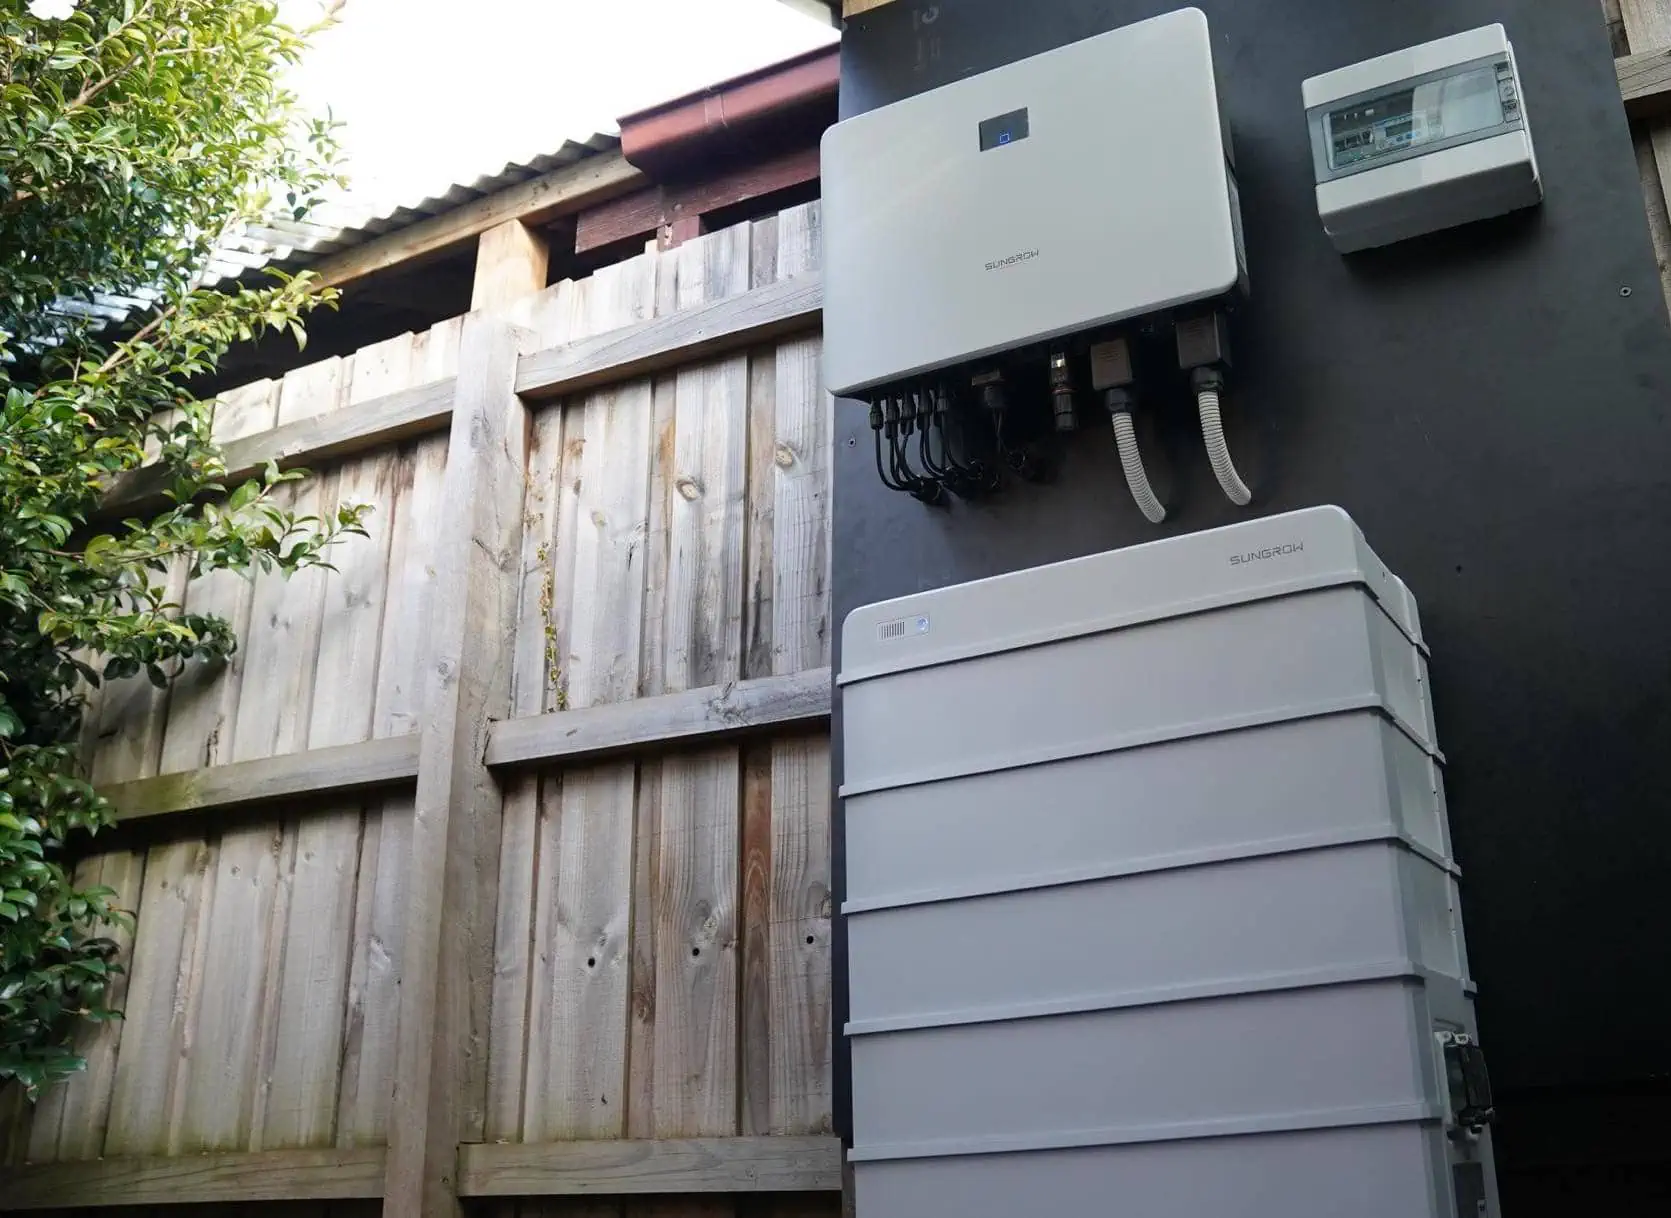 Sungrow inverter with Sungrow SBR HV battery stack installed